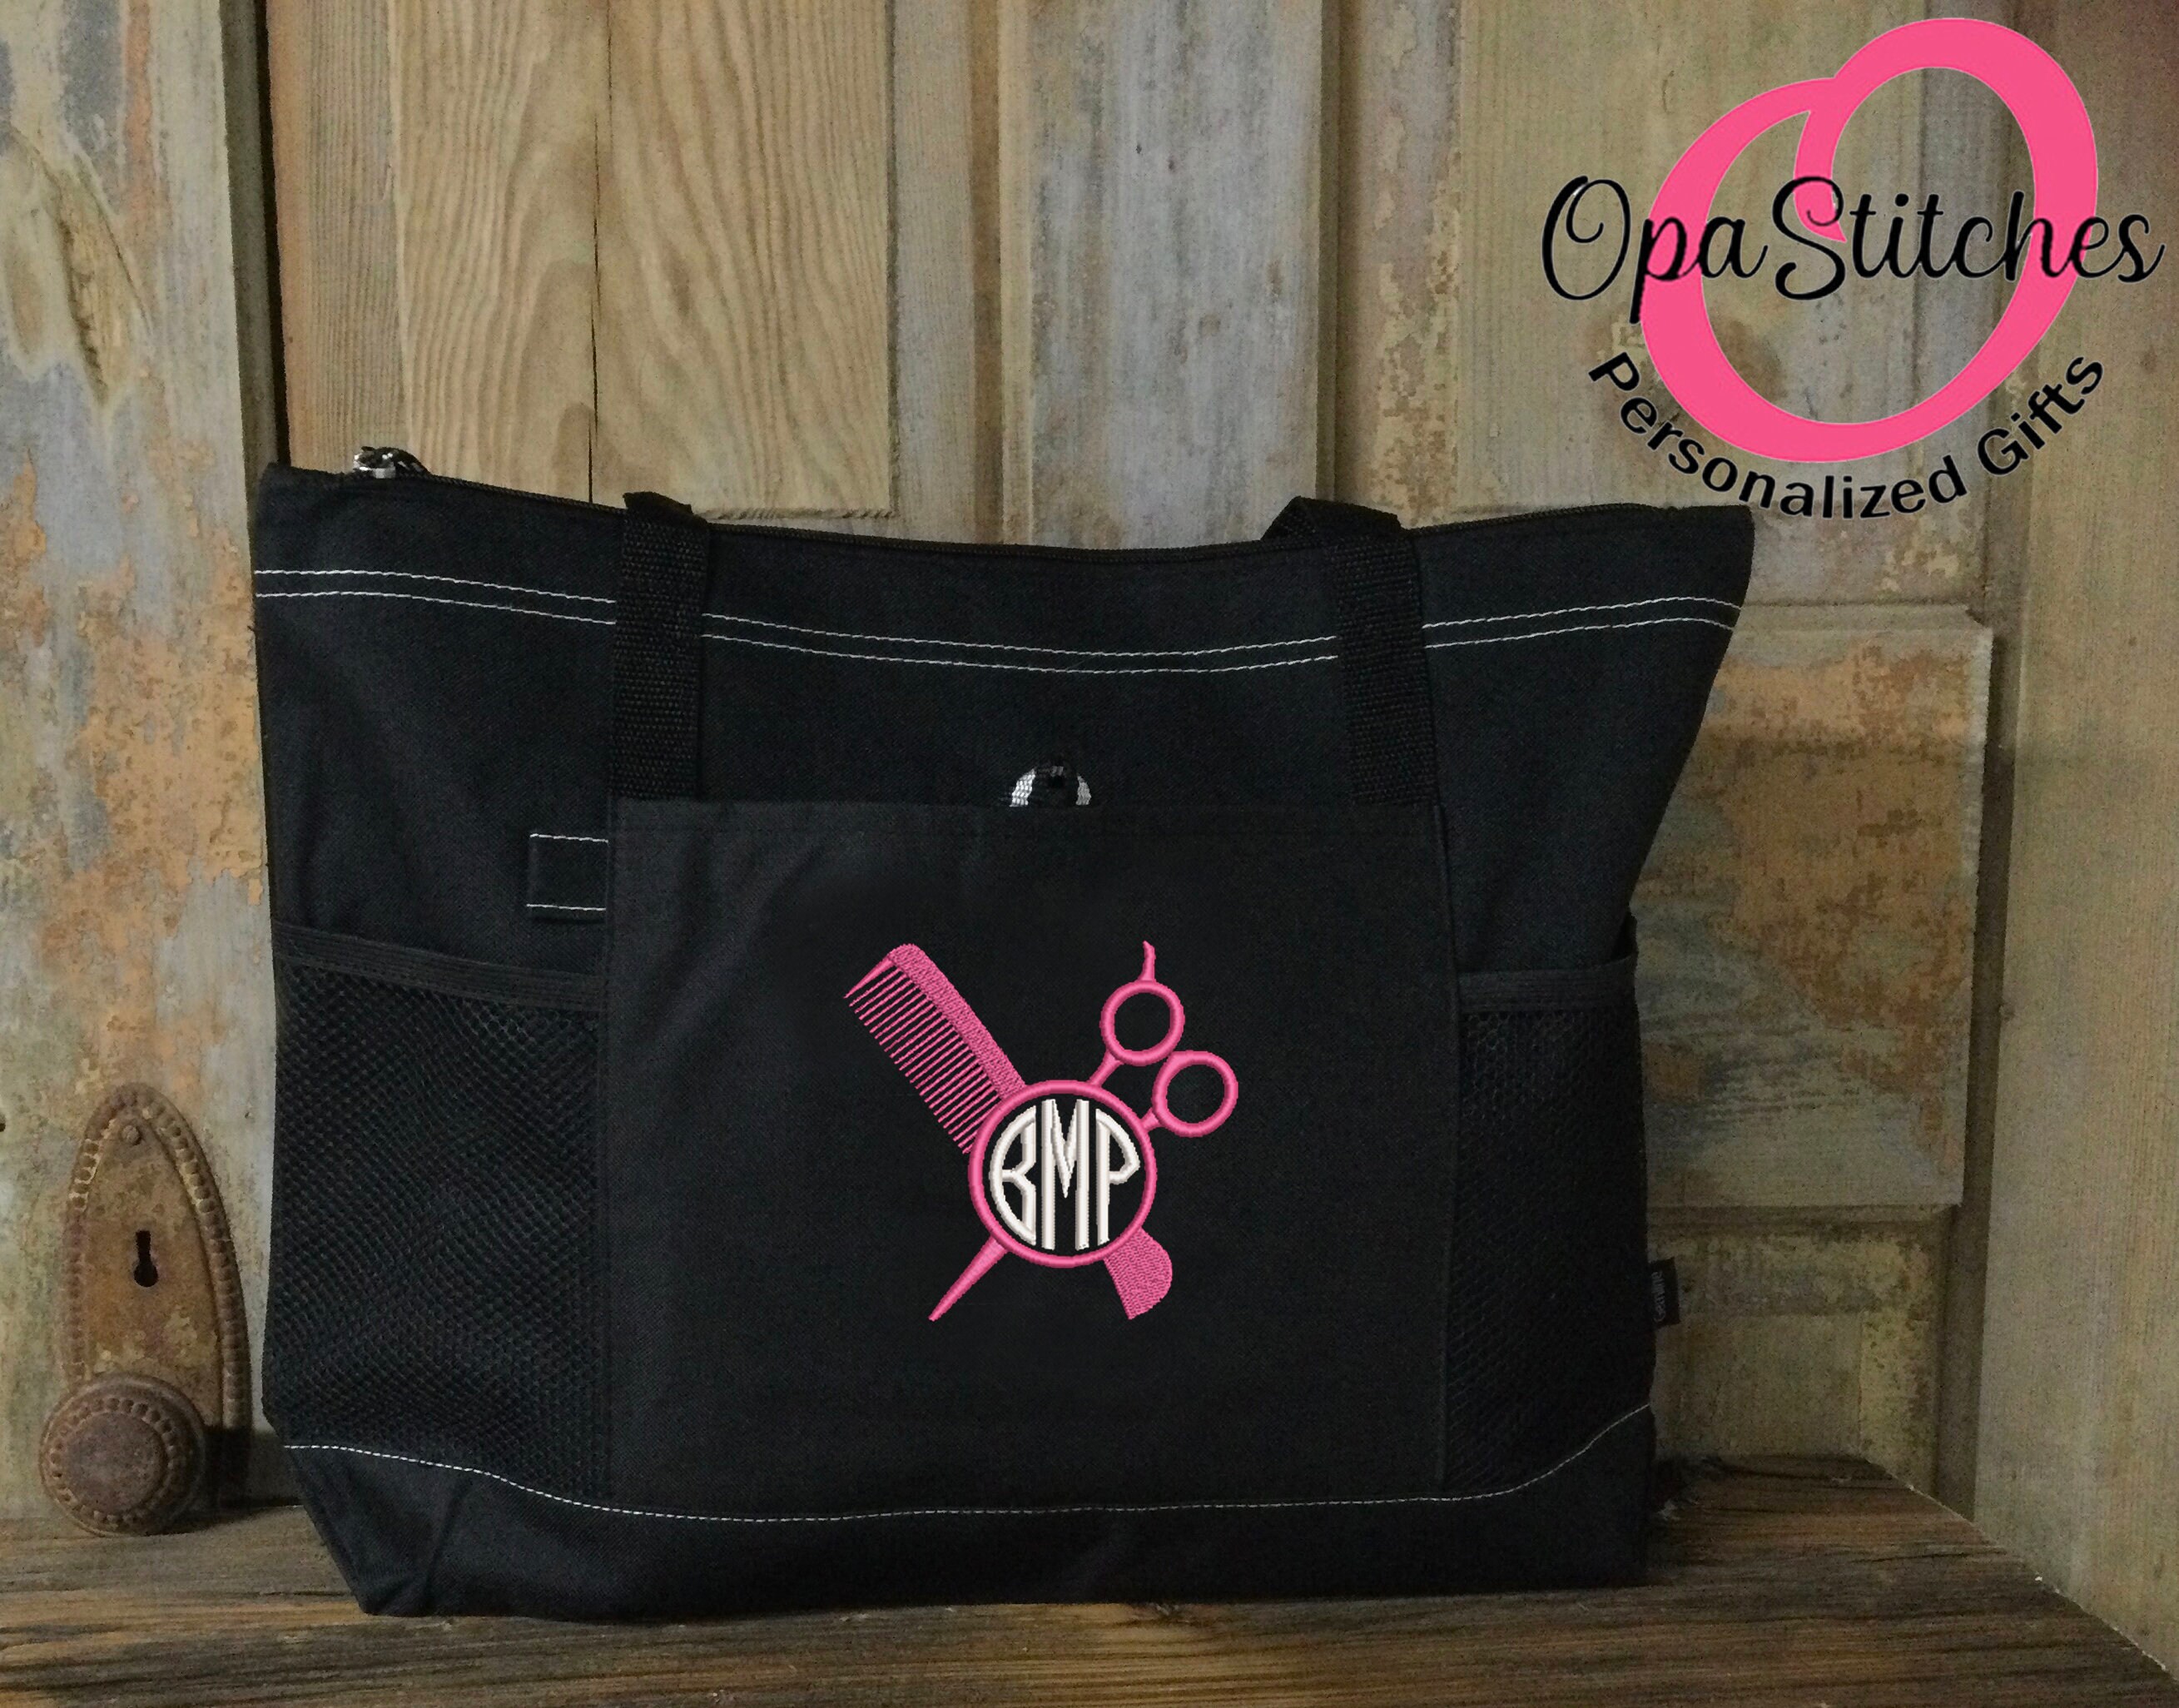 Hair Stylist Tote bag. Beautician Theme Tote Bag. Personalized